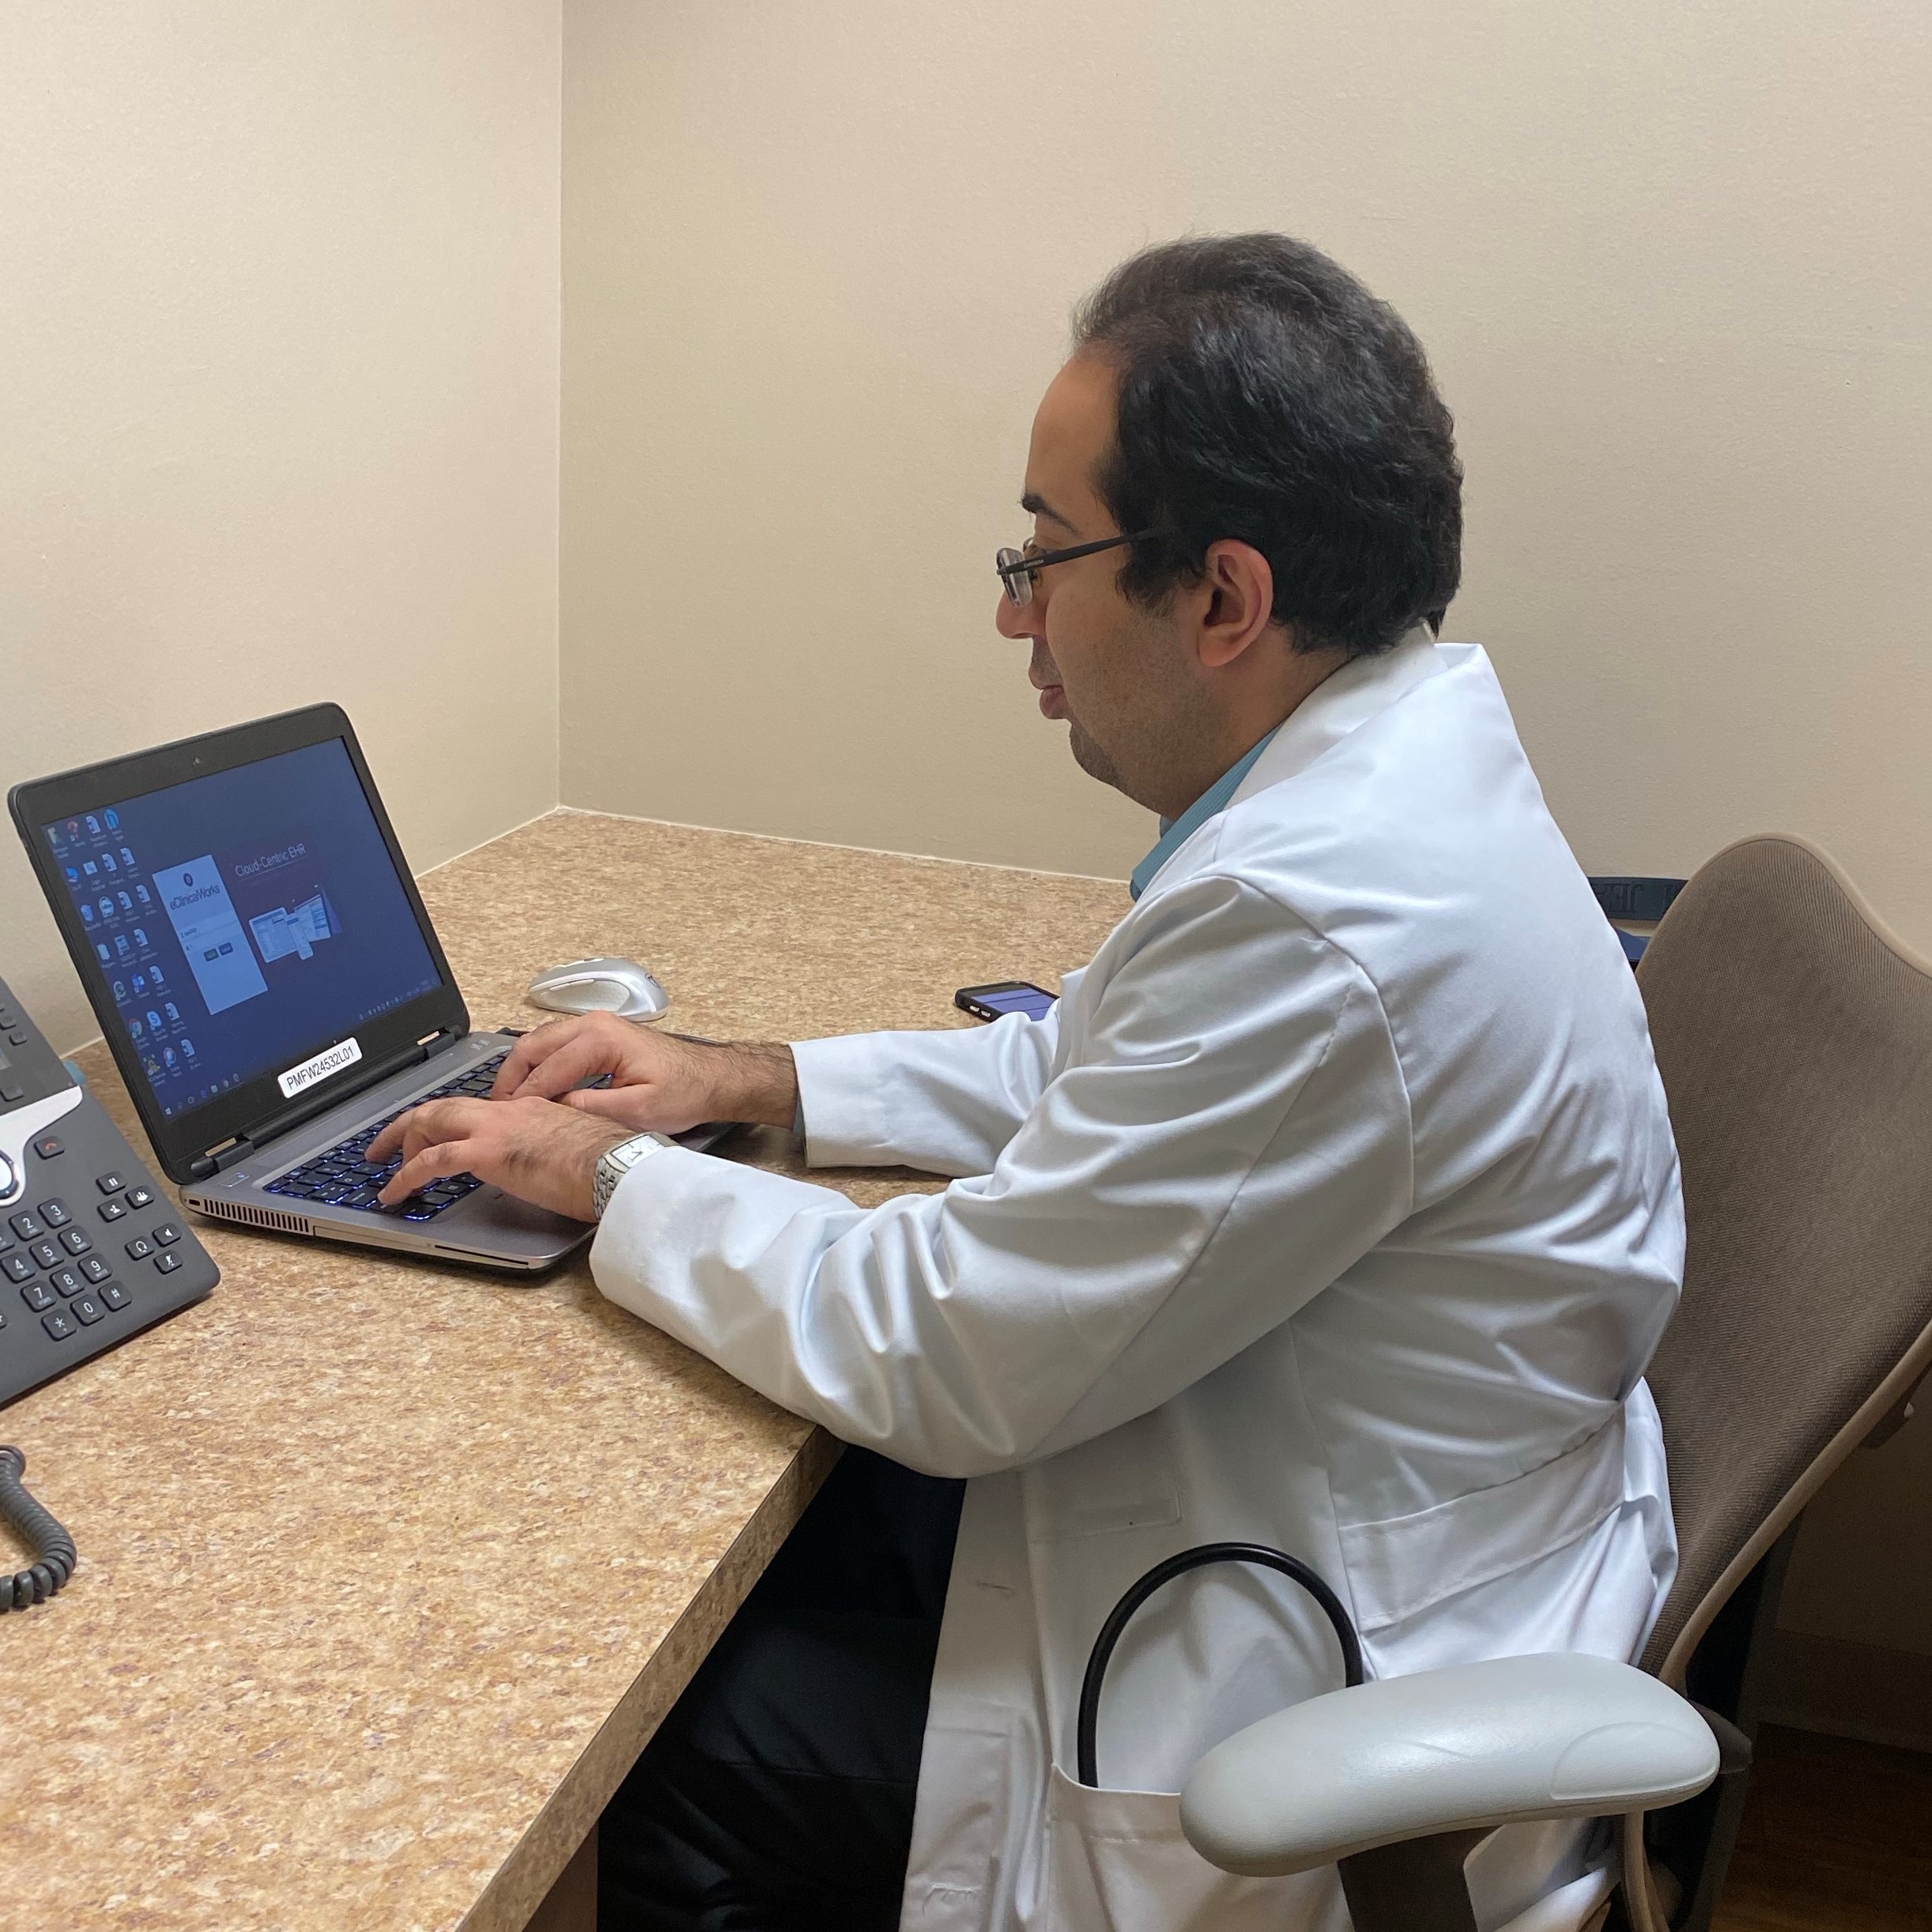 Dr. Farshad Bozorgnia works on his laptop